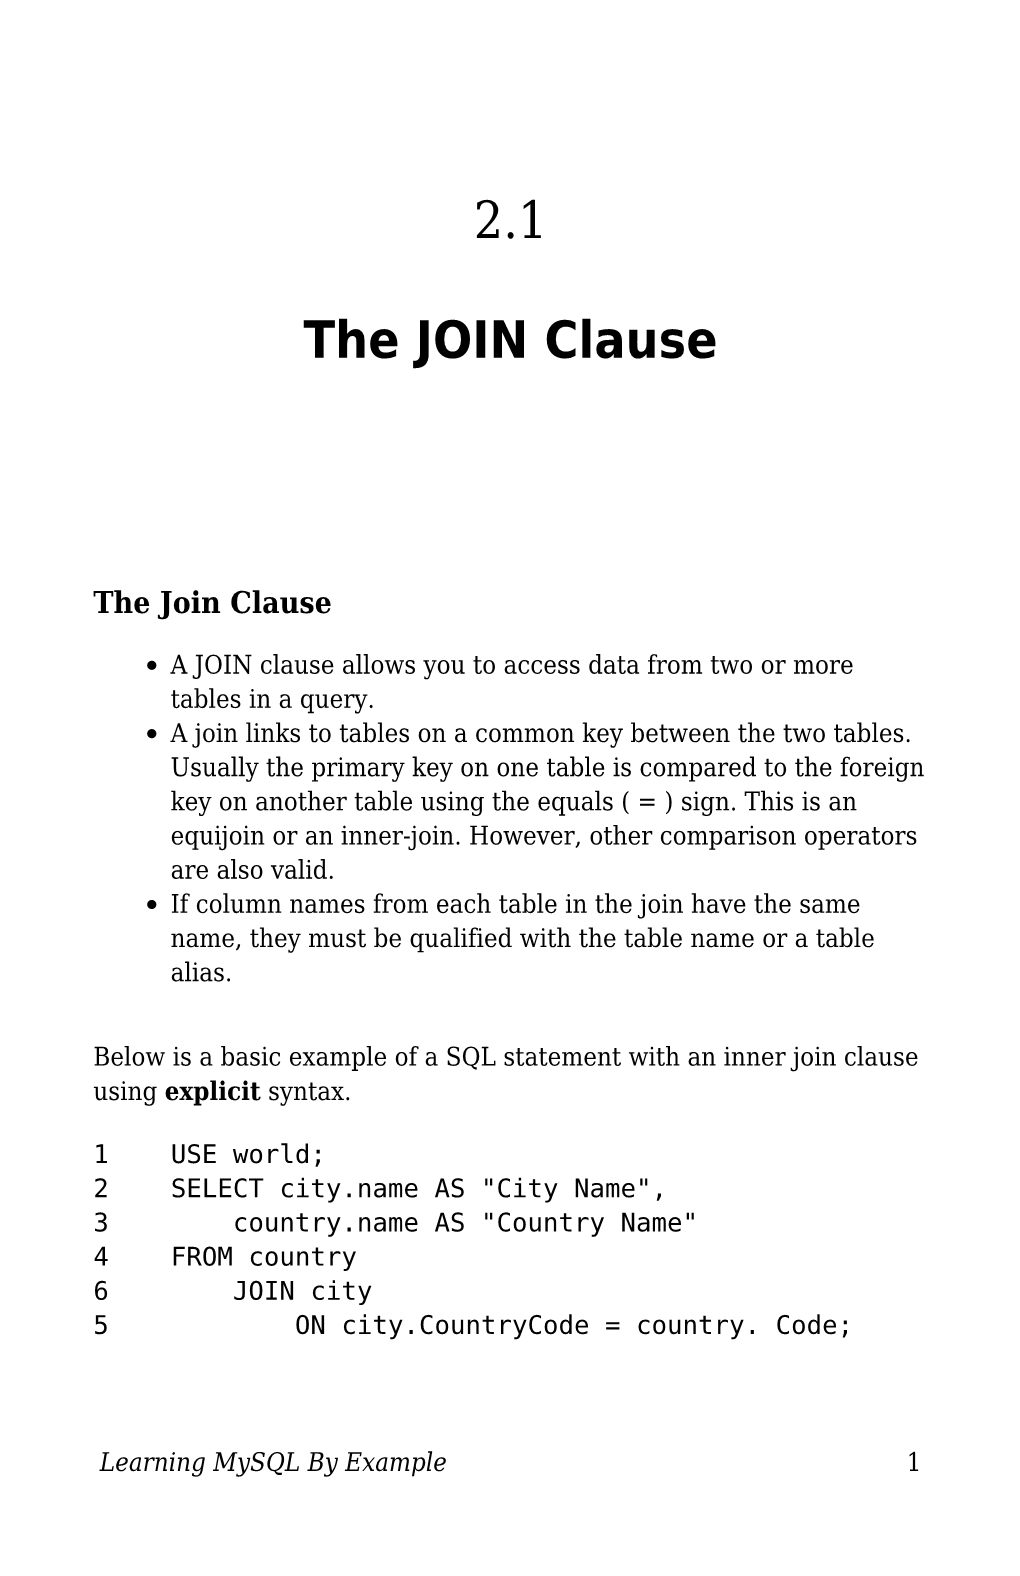 The JOIN Clause